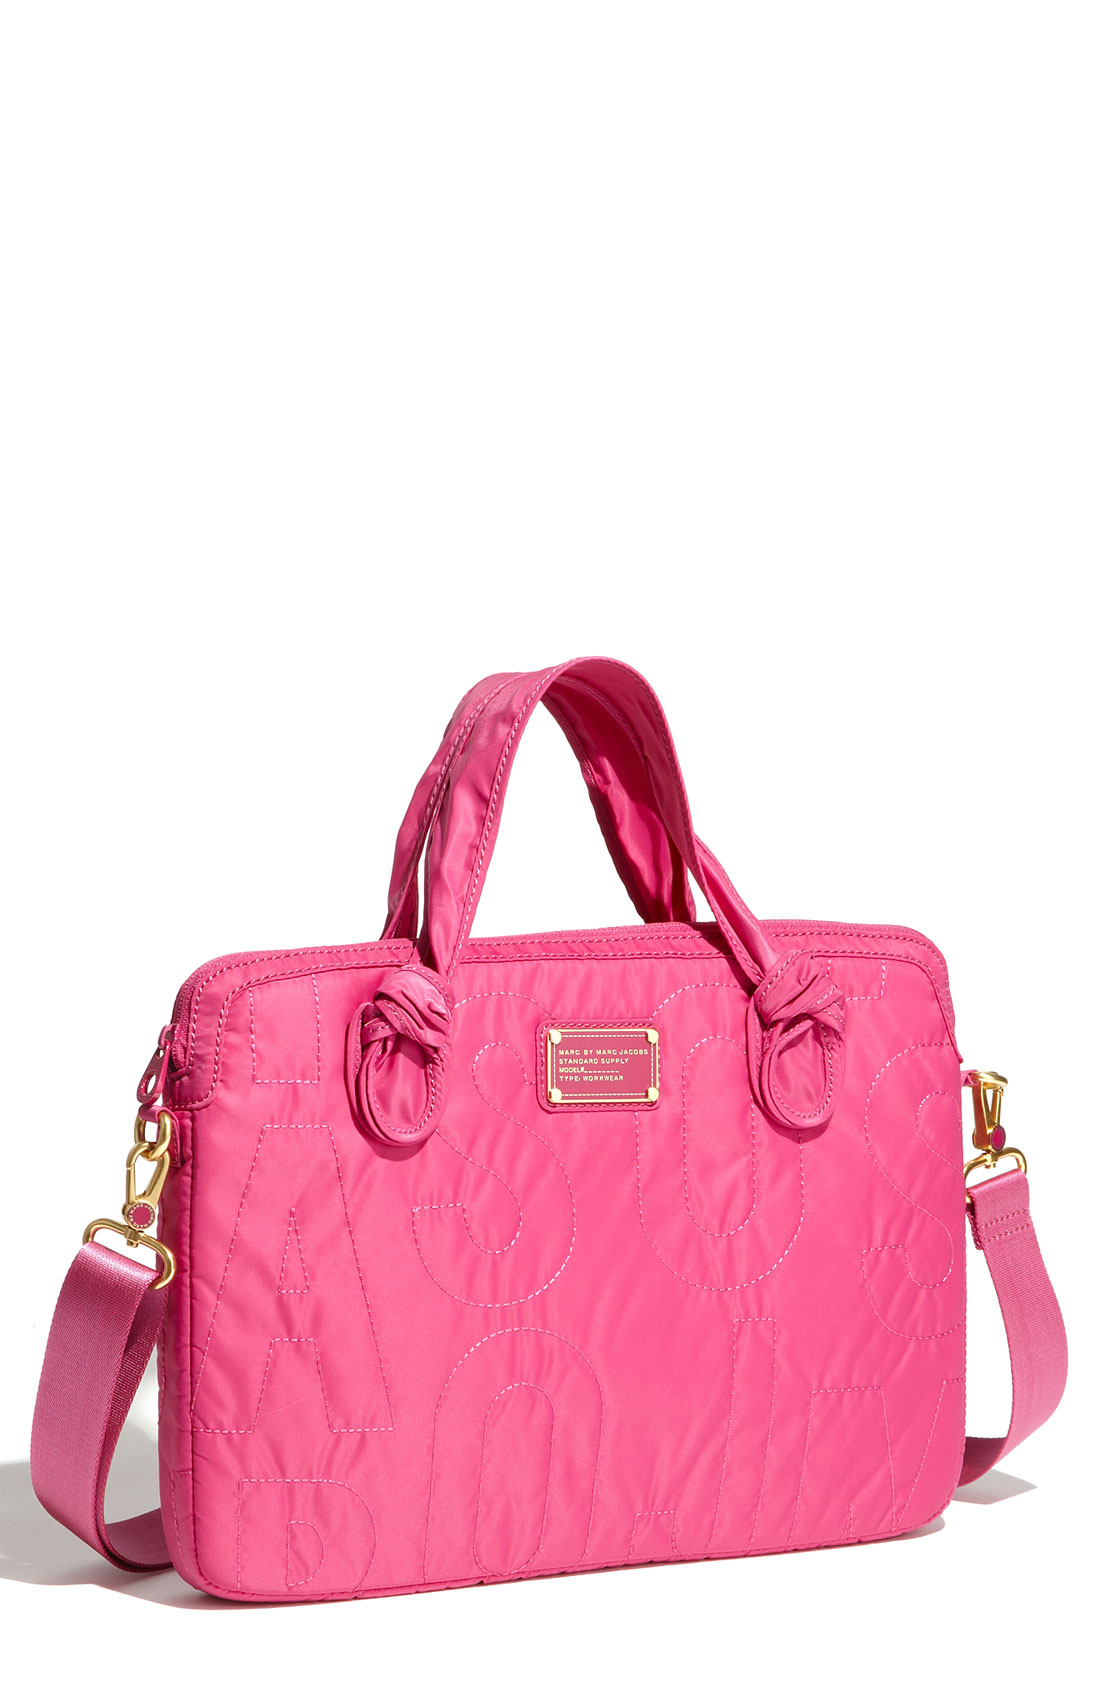 Marc By Marc Jacobs Pretty 15 Computer Commuter Laptop Bag in Pink (fuchsia) | Lyst